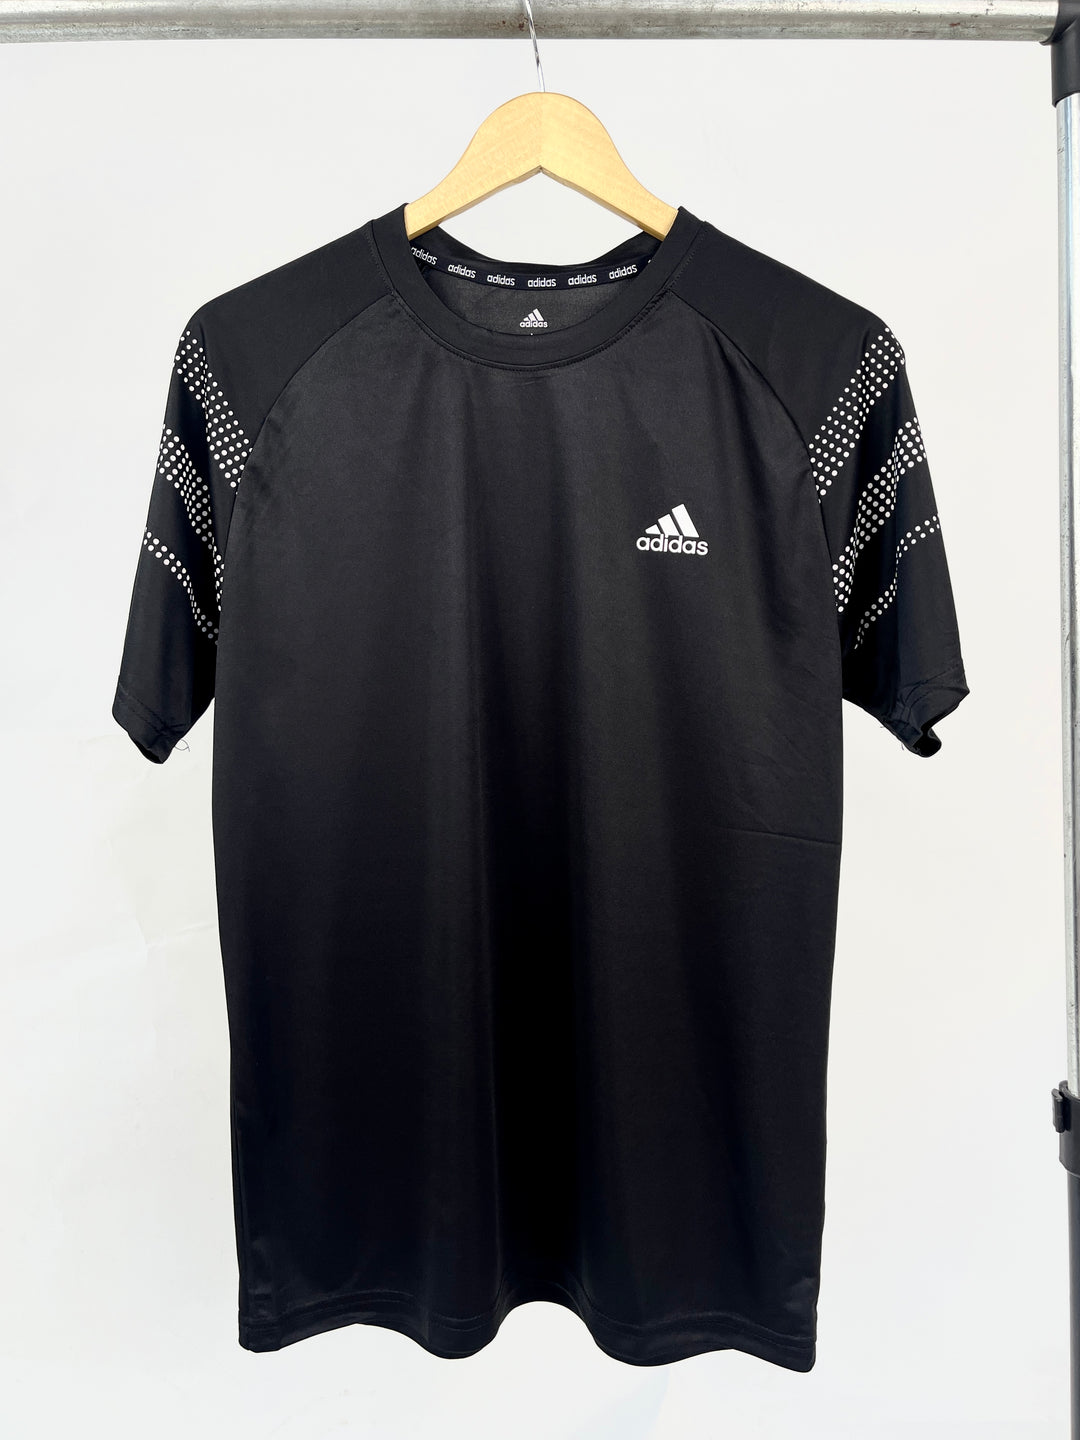 Adidas dotted sleeve stripe logo sports t-shirt in black